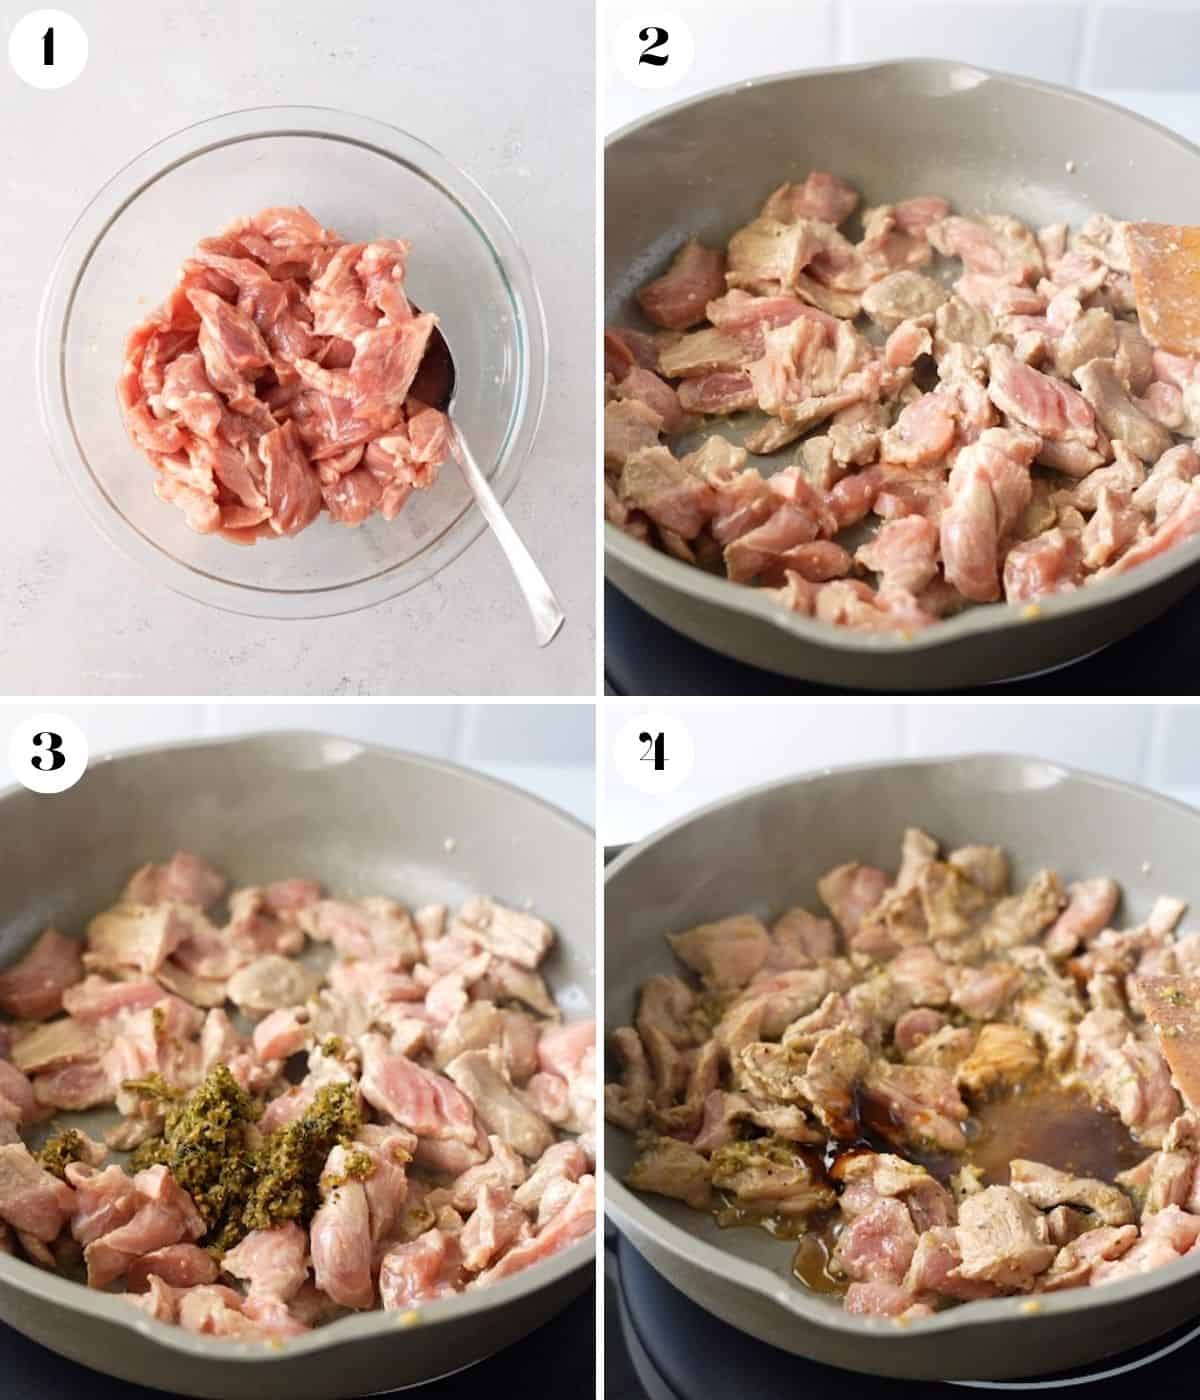 4 images of pork being cooked in a skillet.